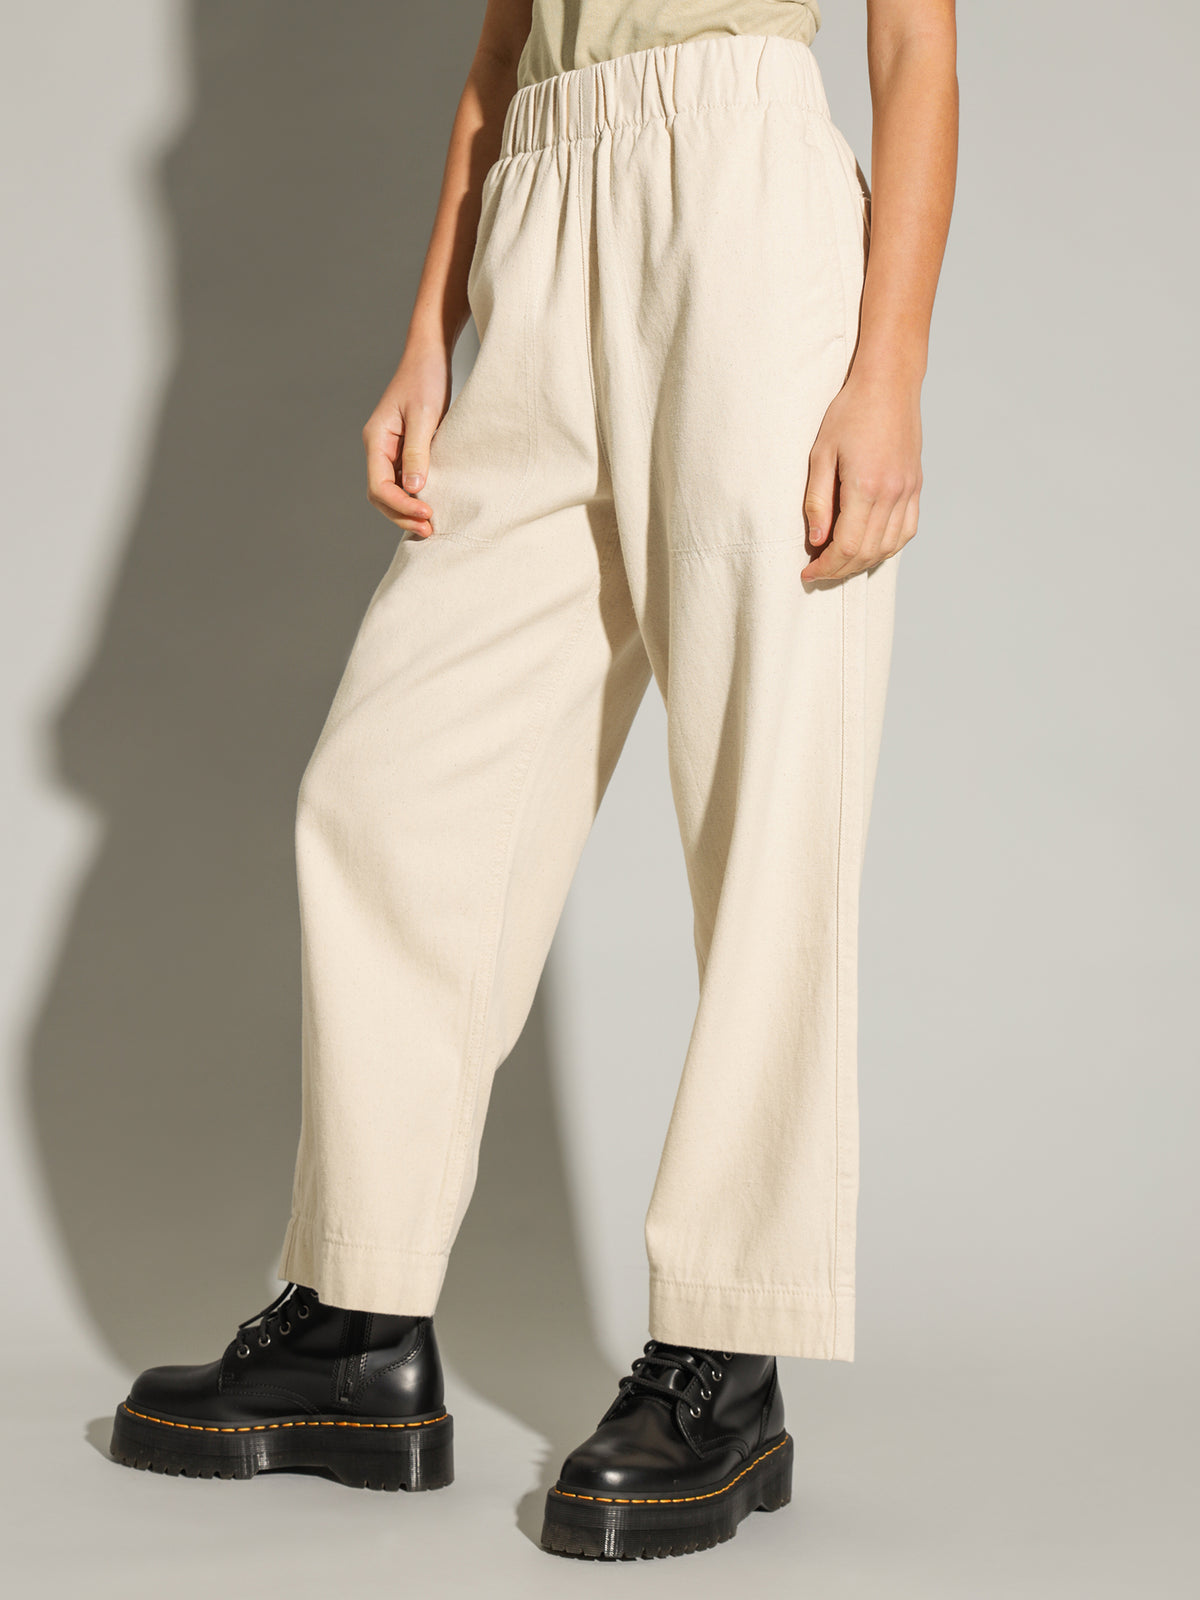 Ease Utility Pants in Unbleached